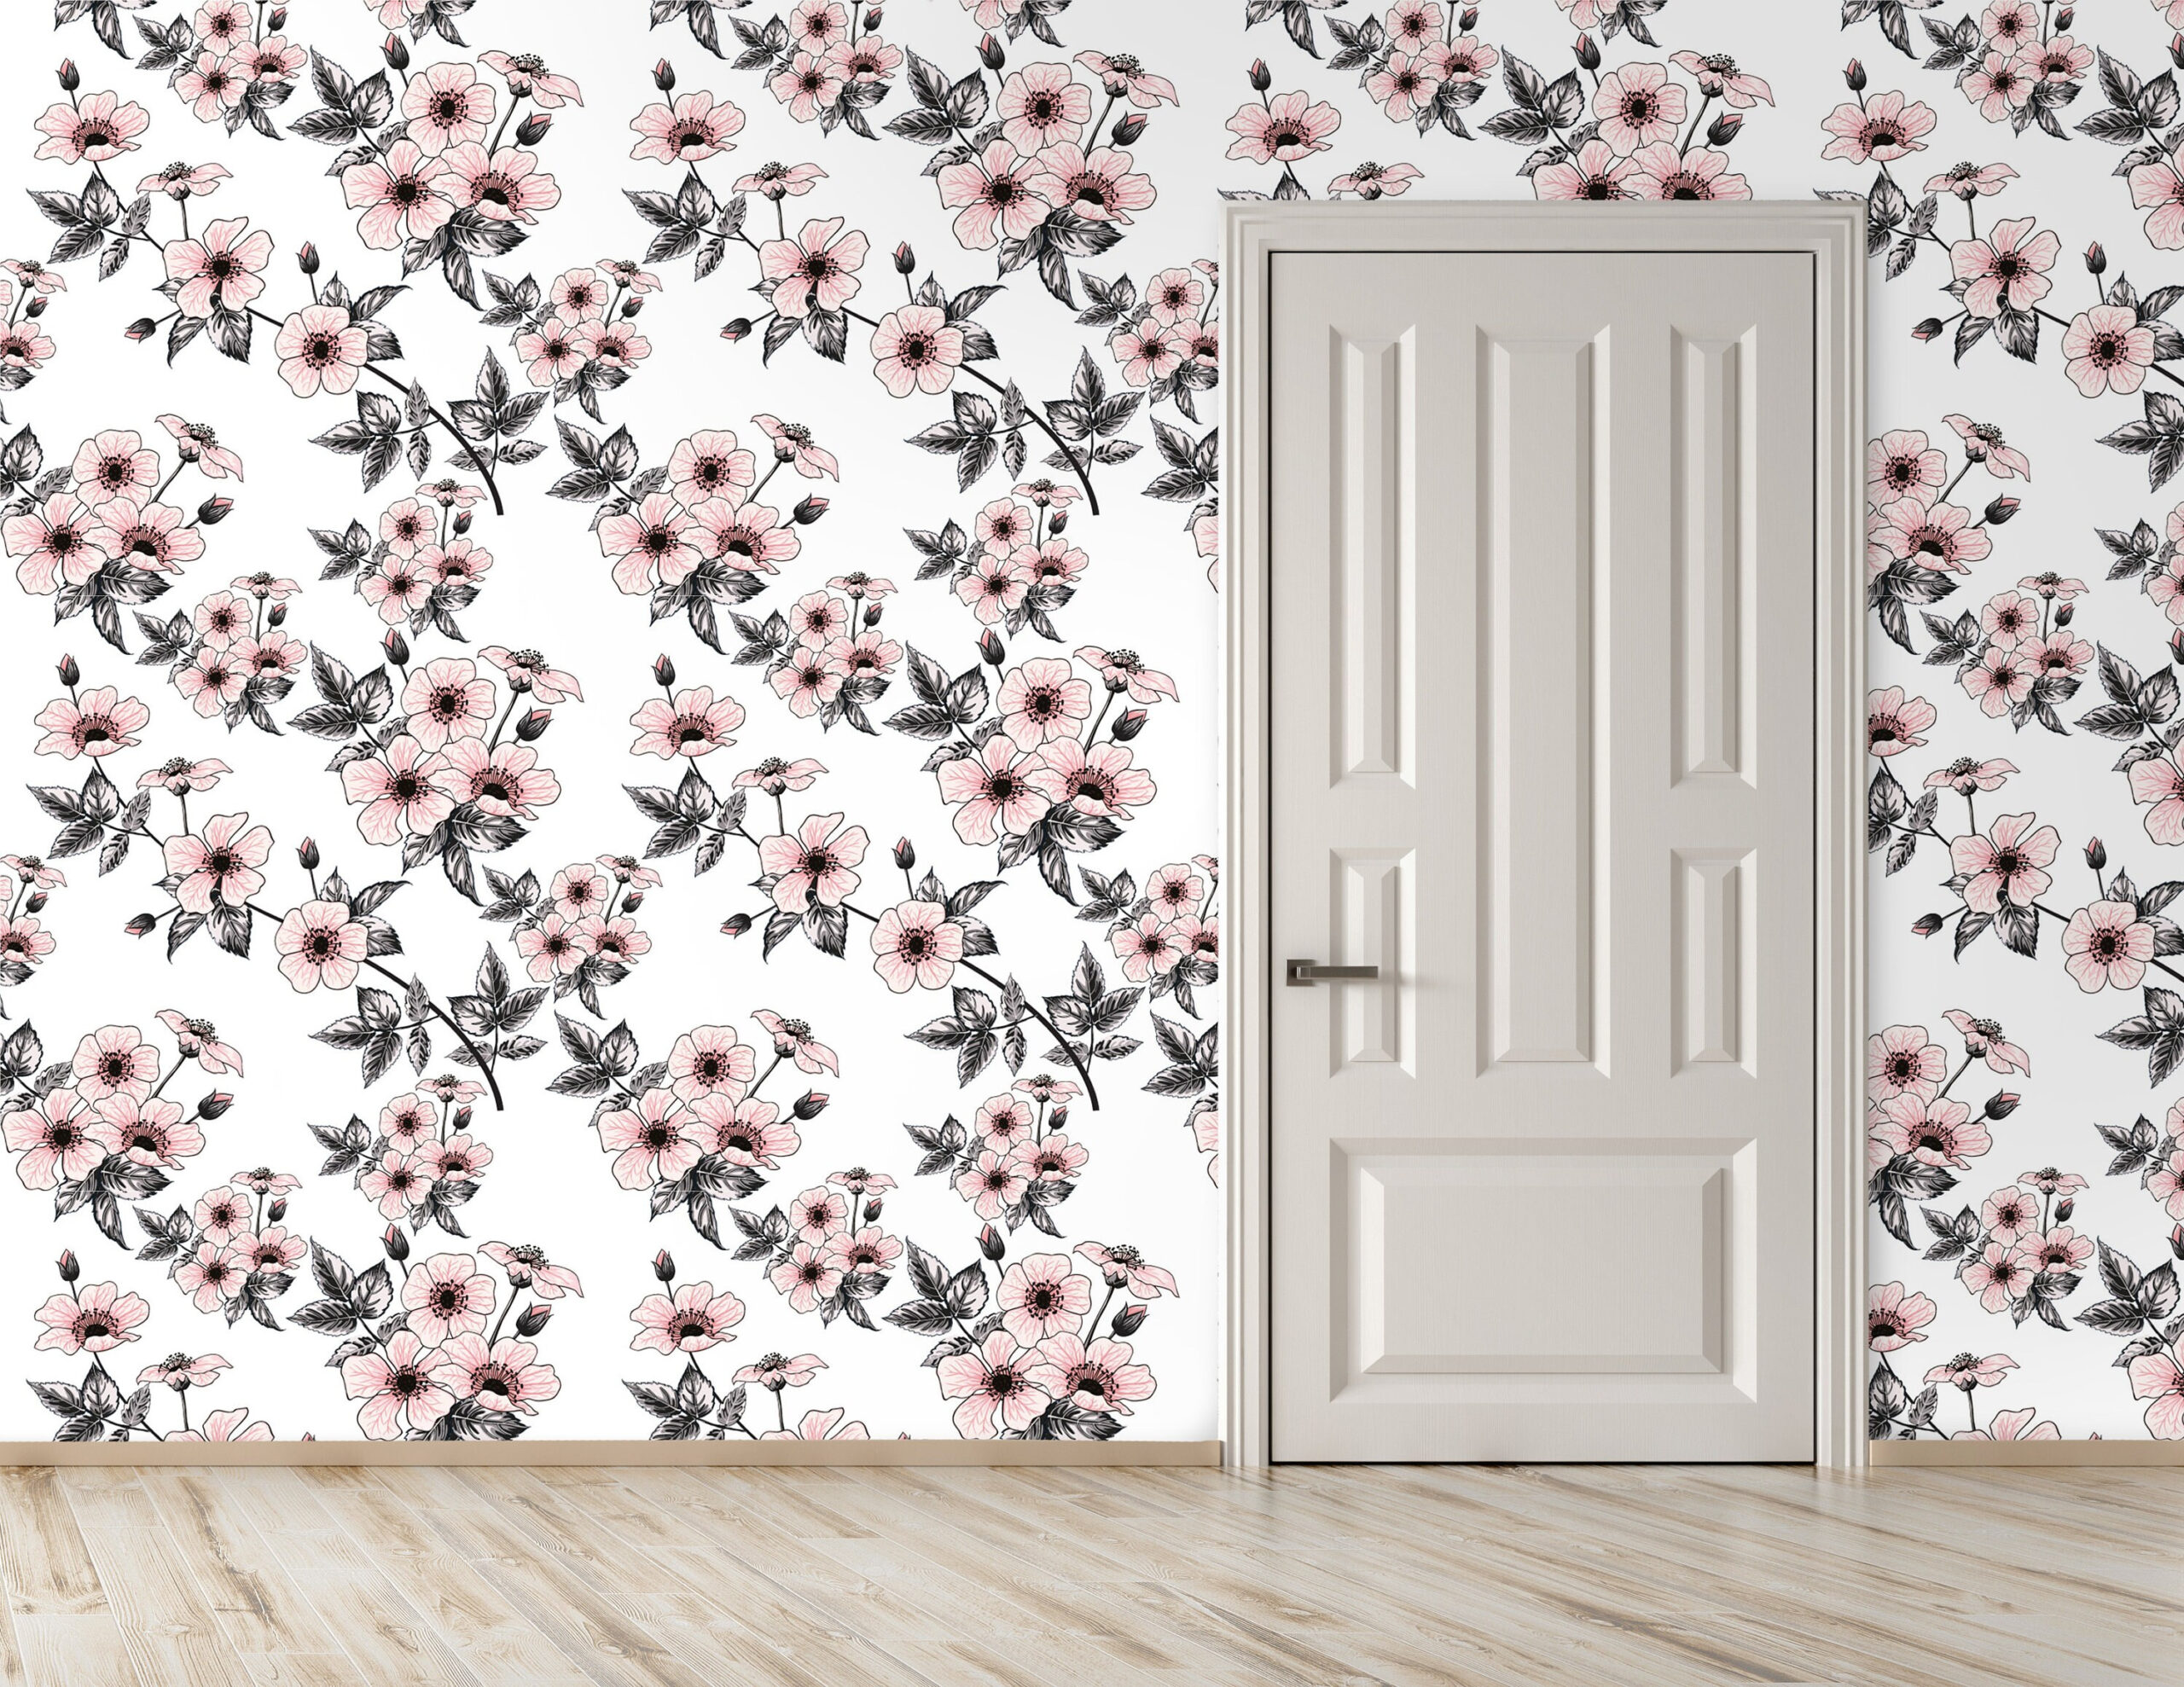 Dollhouse Wallpaper 1 12 Scale Pink Wild Flower Printable Etsy